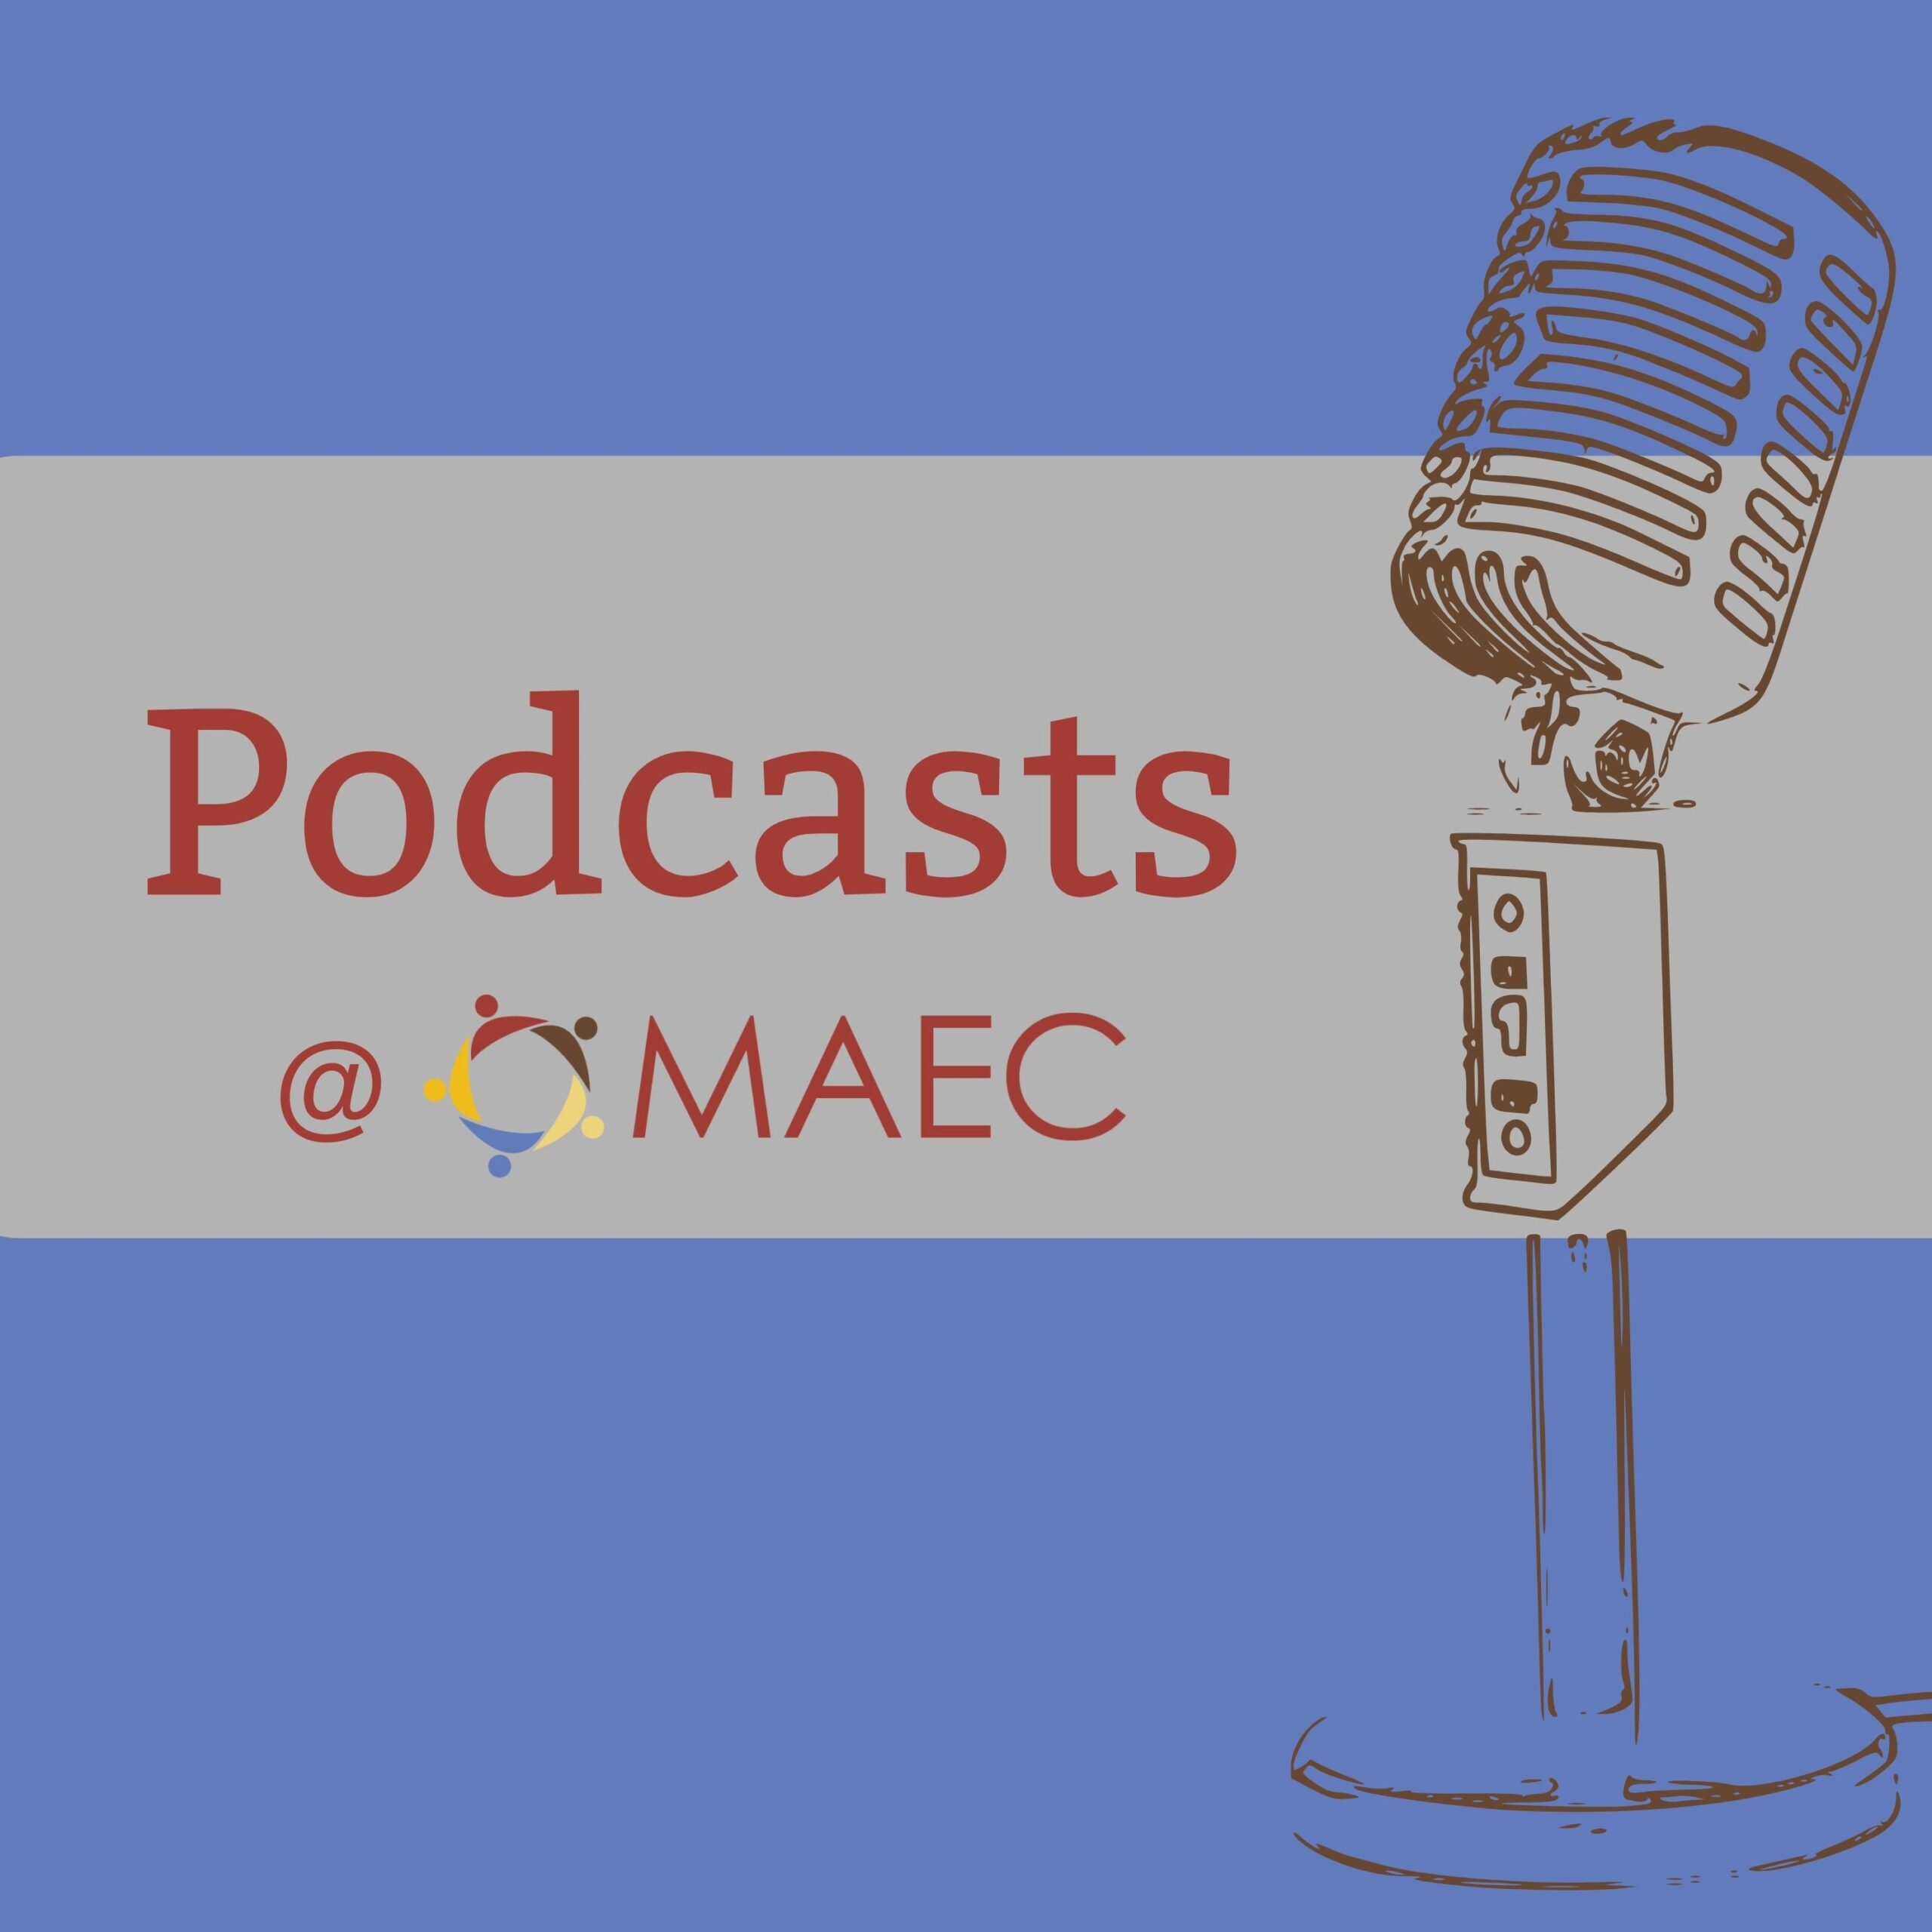 microphone on top of blue background with Podcasts at MAEC spelled out